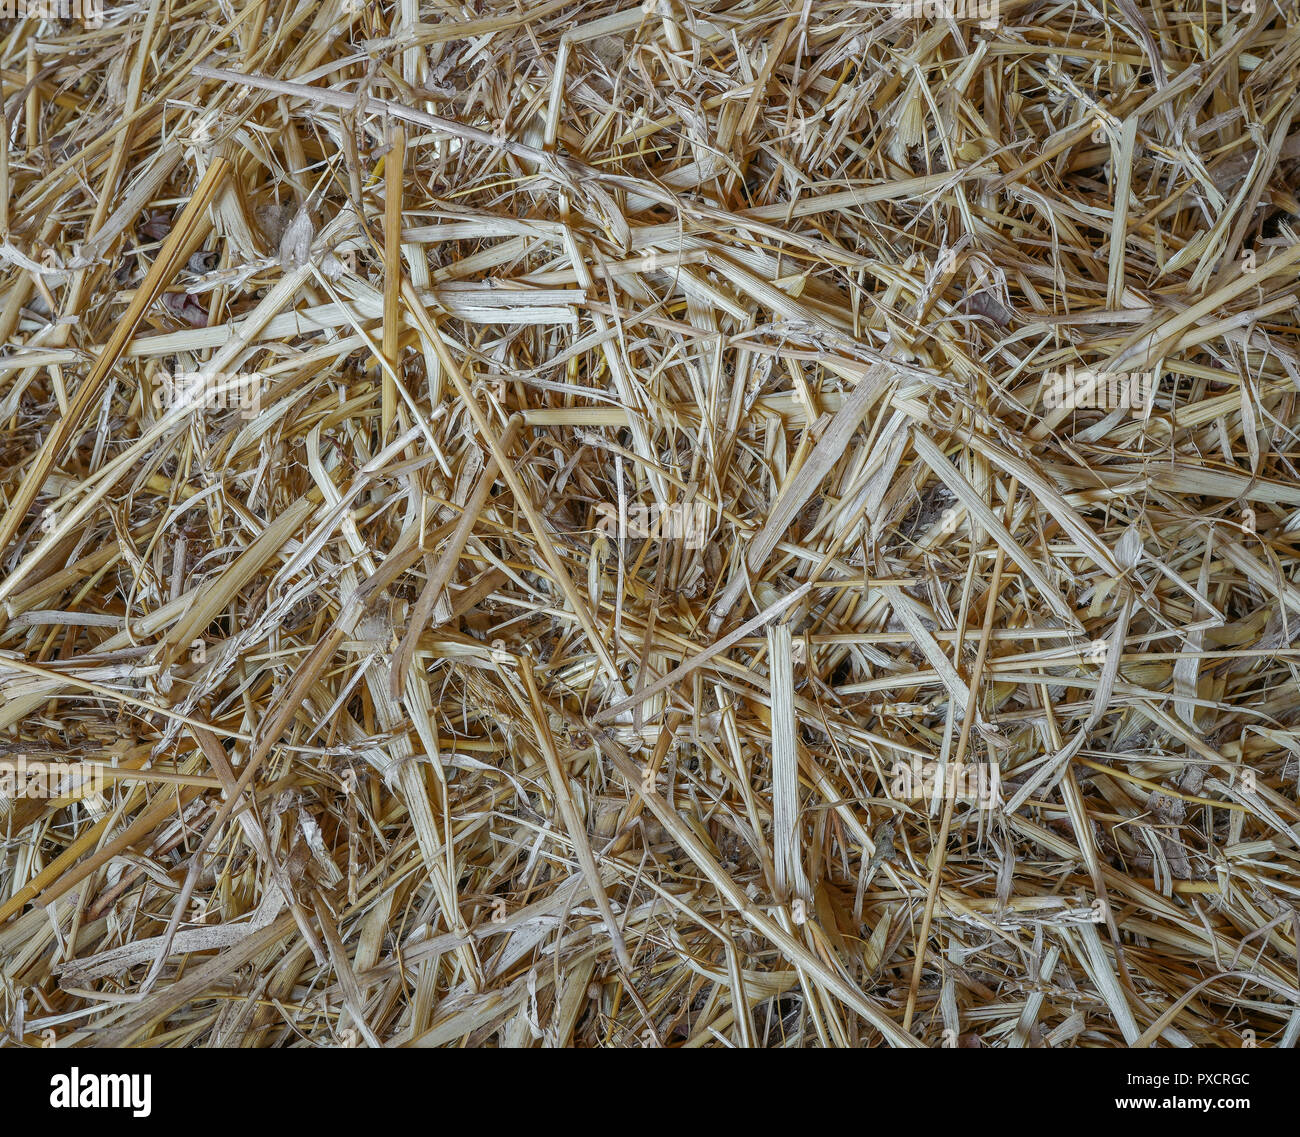 Dry straw on the crowd that is placed in the stable Stock Photo